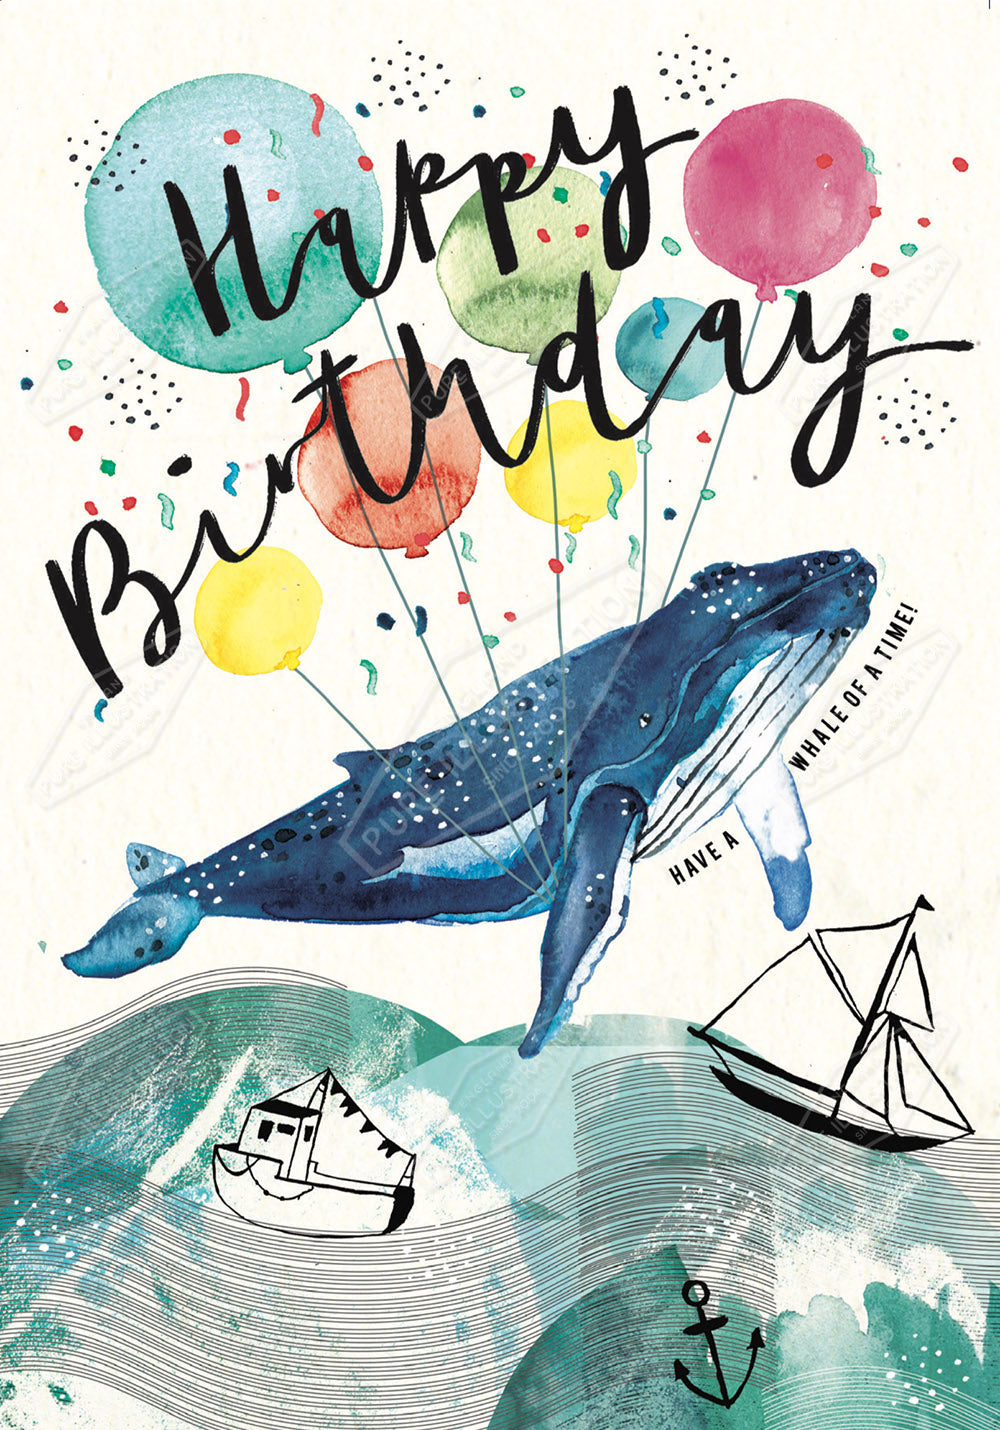 00034343EST- Emily Stalley is represented by Pure Art Licensing Agency - Birthday Greeting Card Design